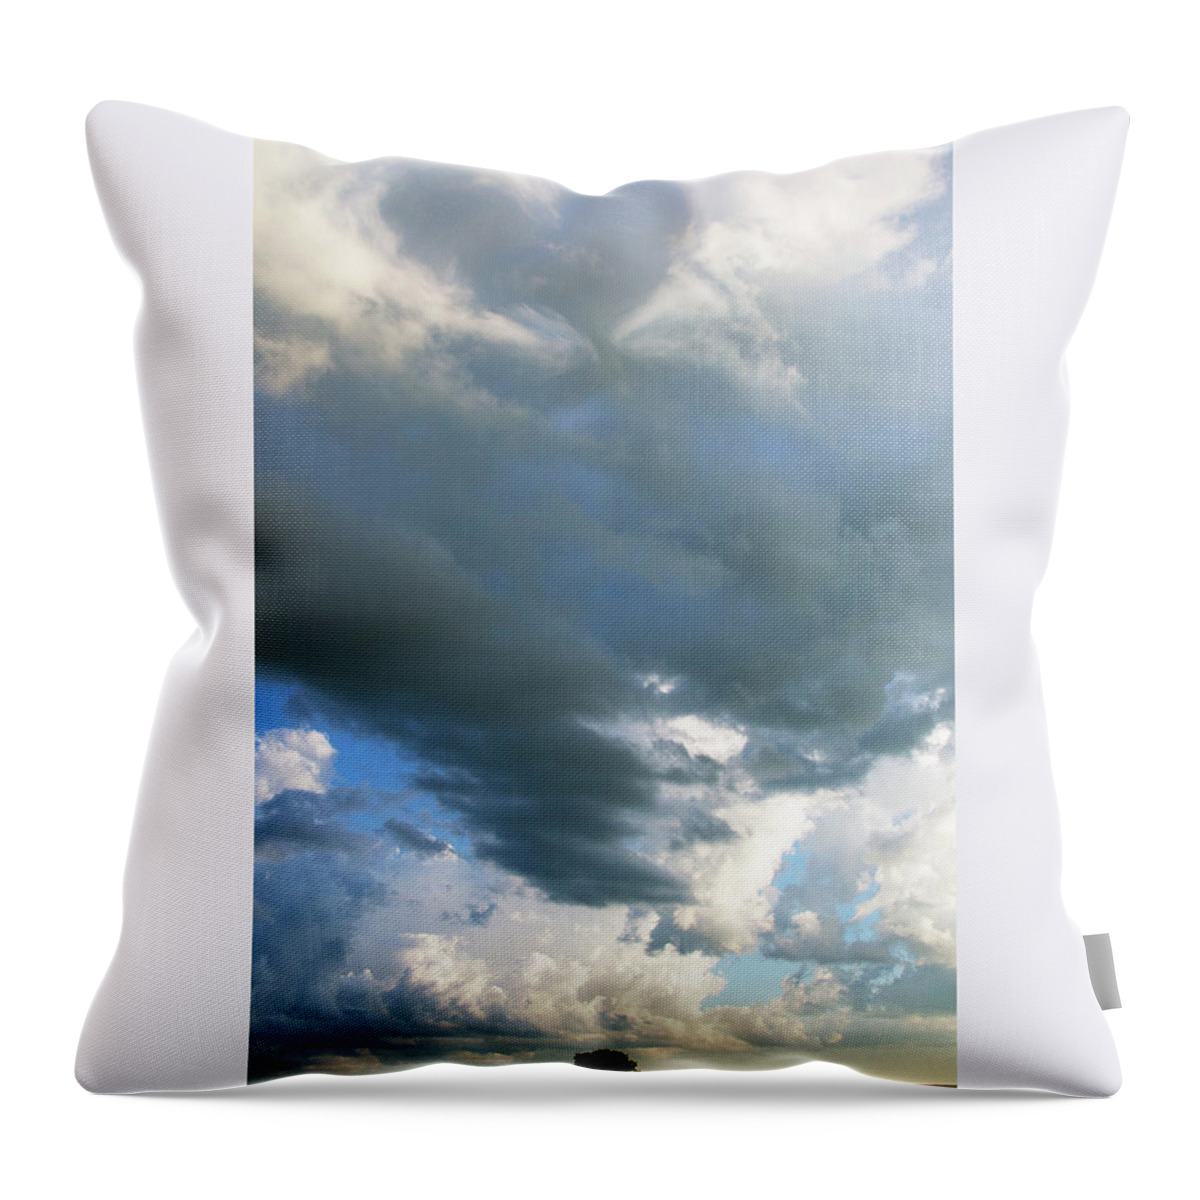  Throw Pillow featuring the photograph Love by Sandra Parlow